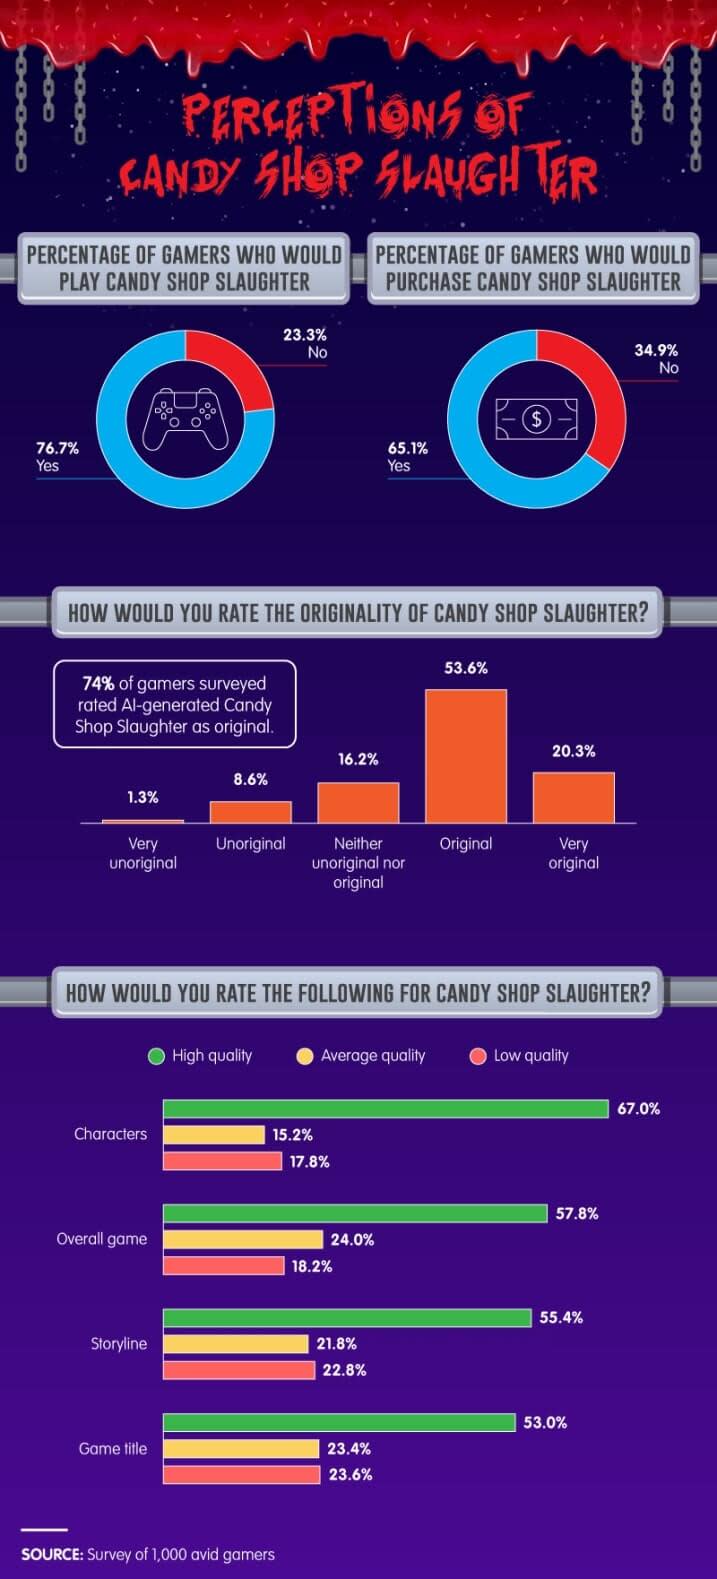 Perceptions of Candy Shop Slaughter